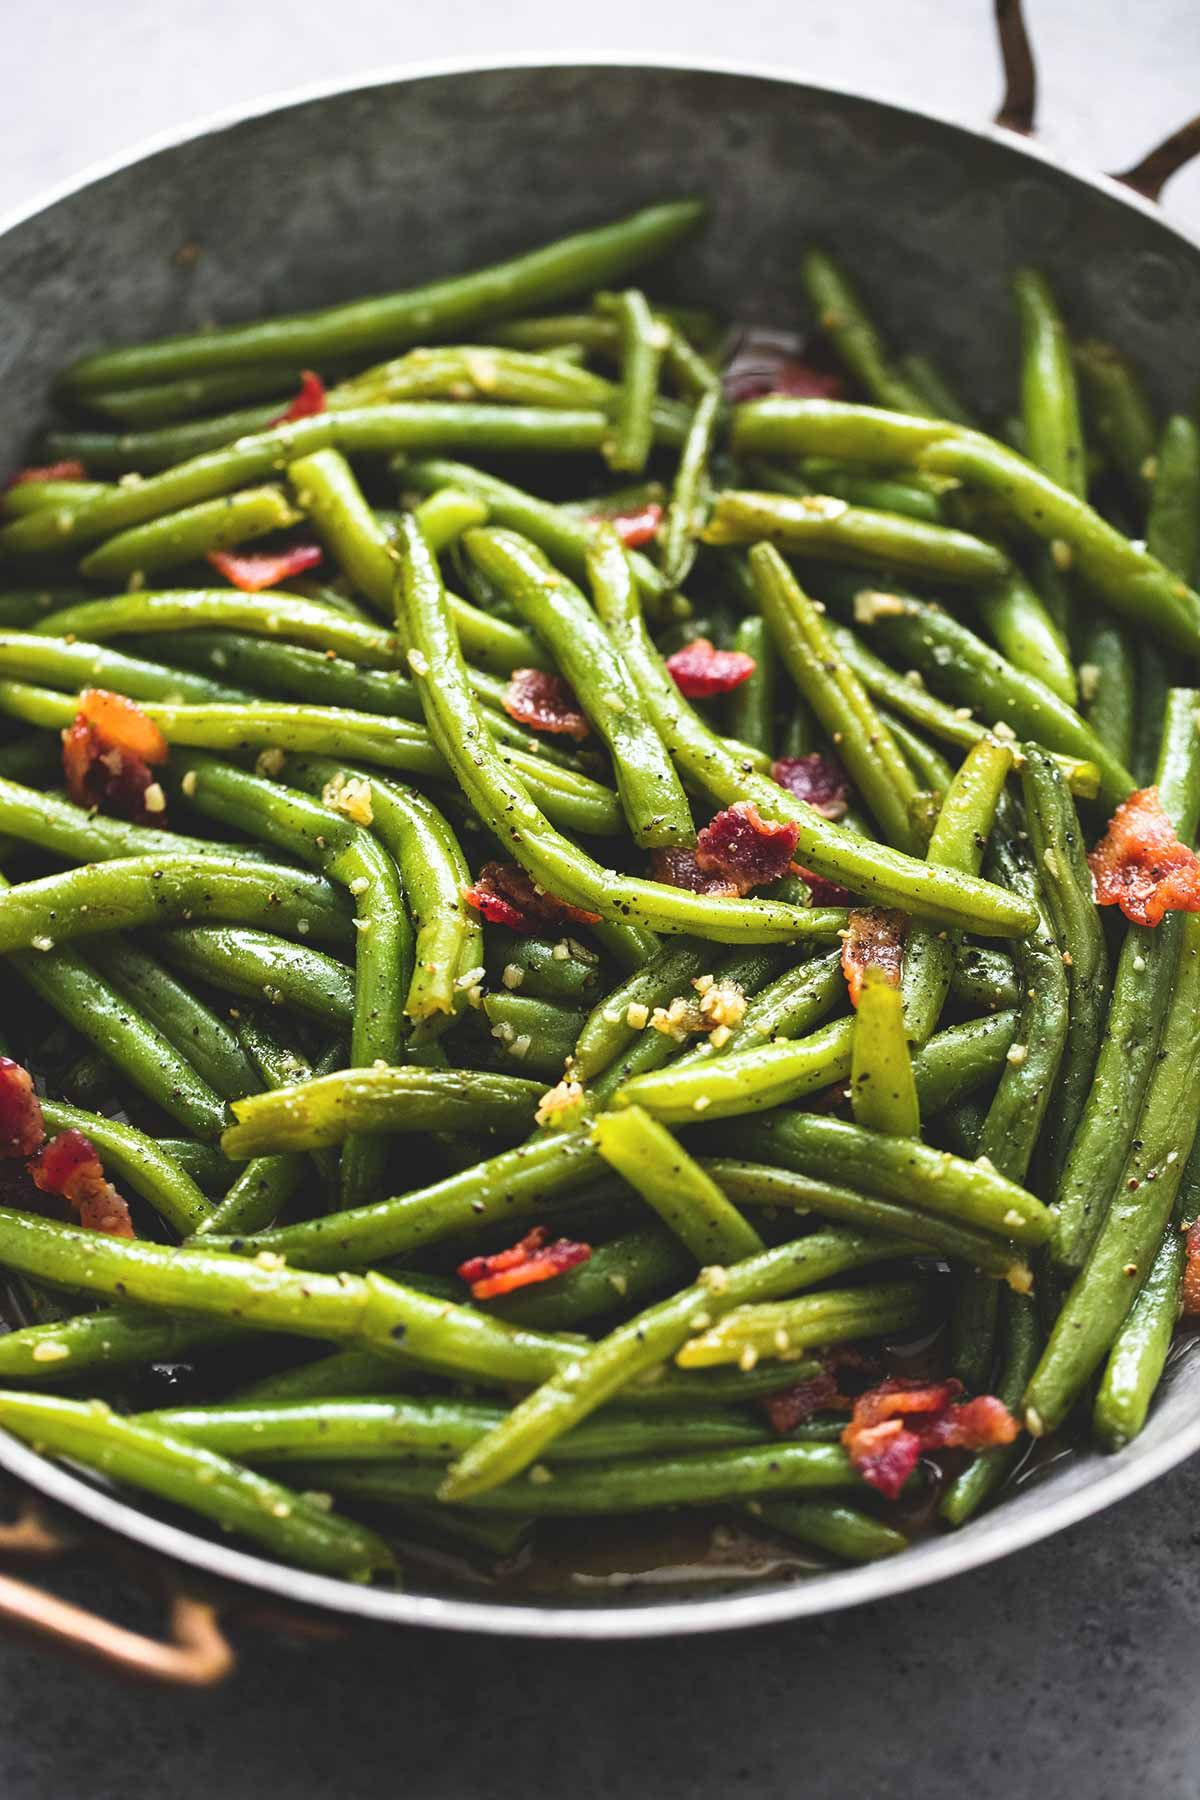 Thanksgiving Green Bean Recipe
 Easy Brown Sugar Green Beans with Bacon the perfect side